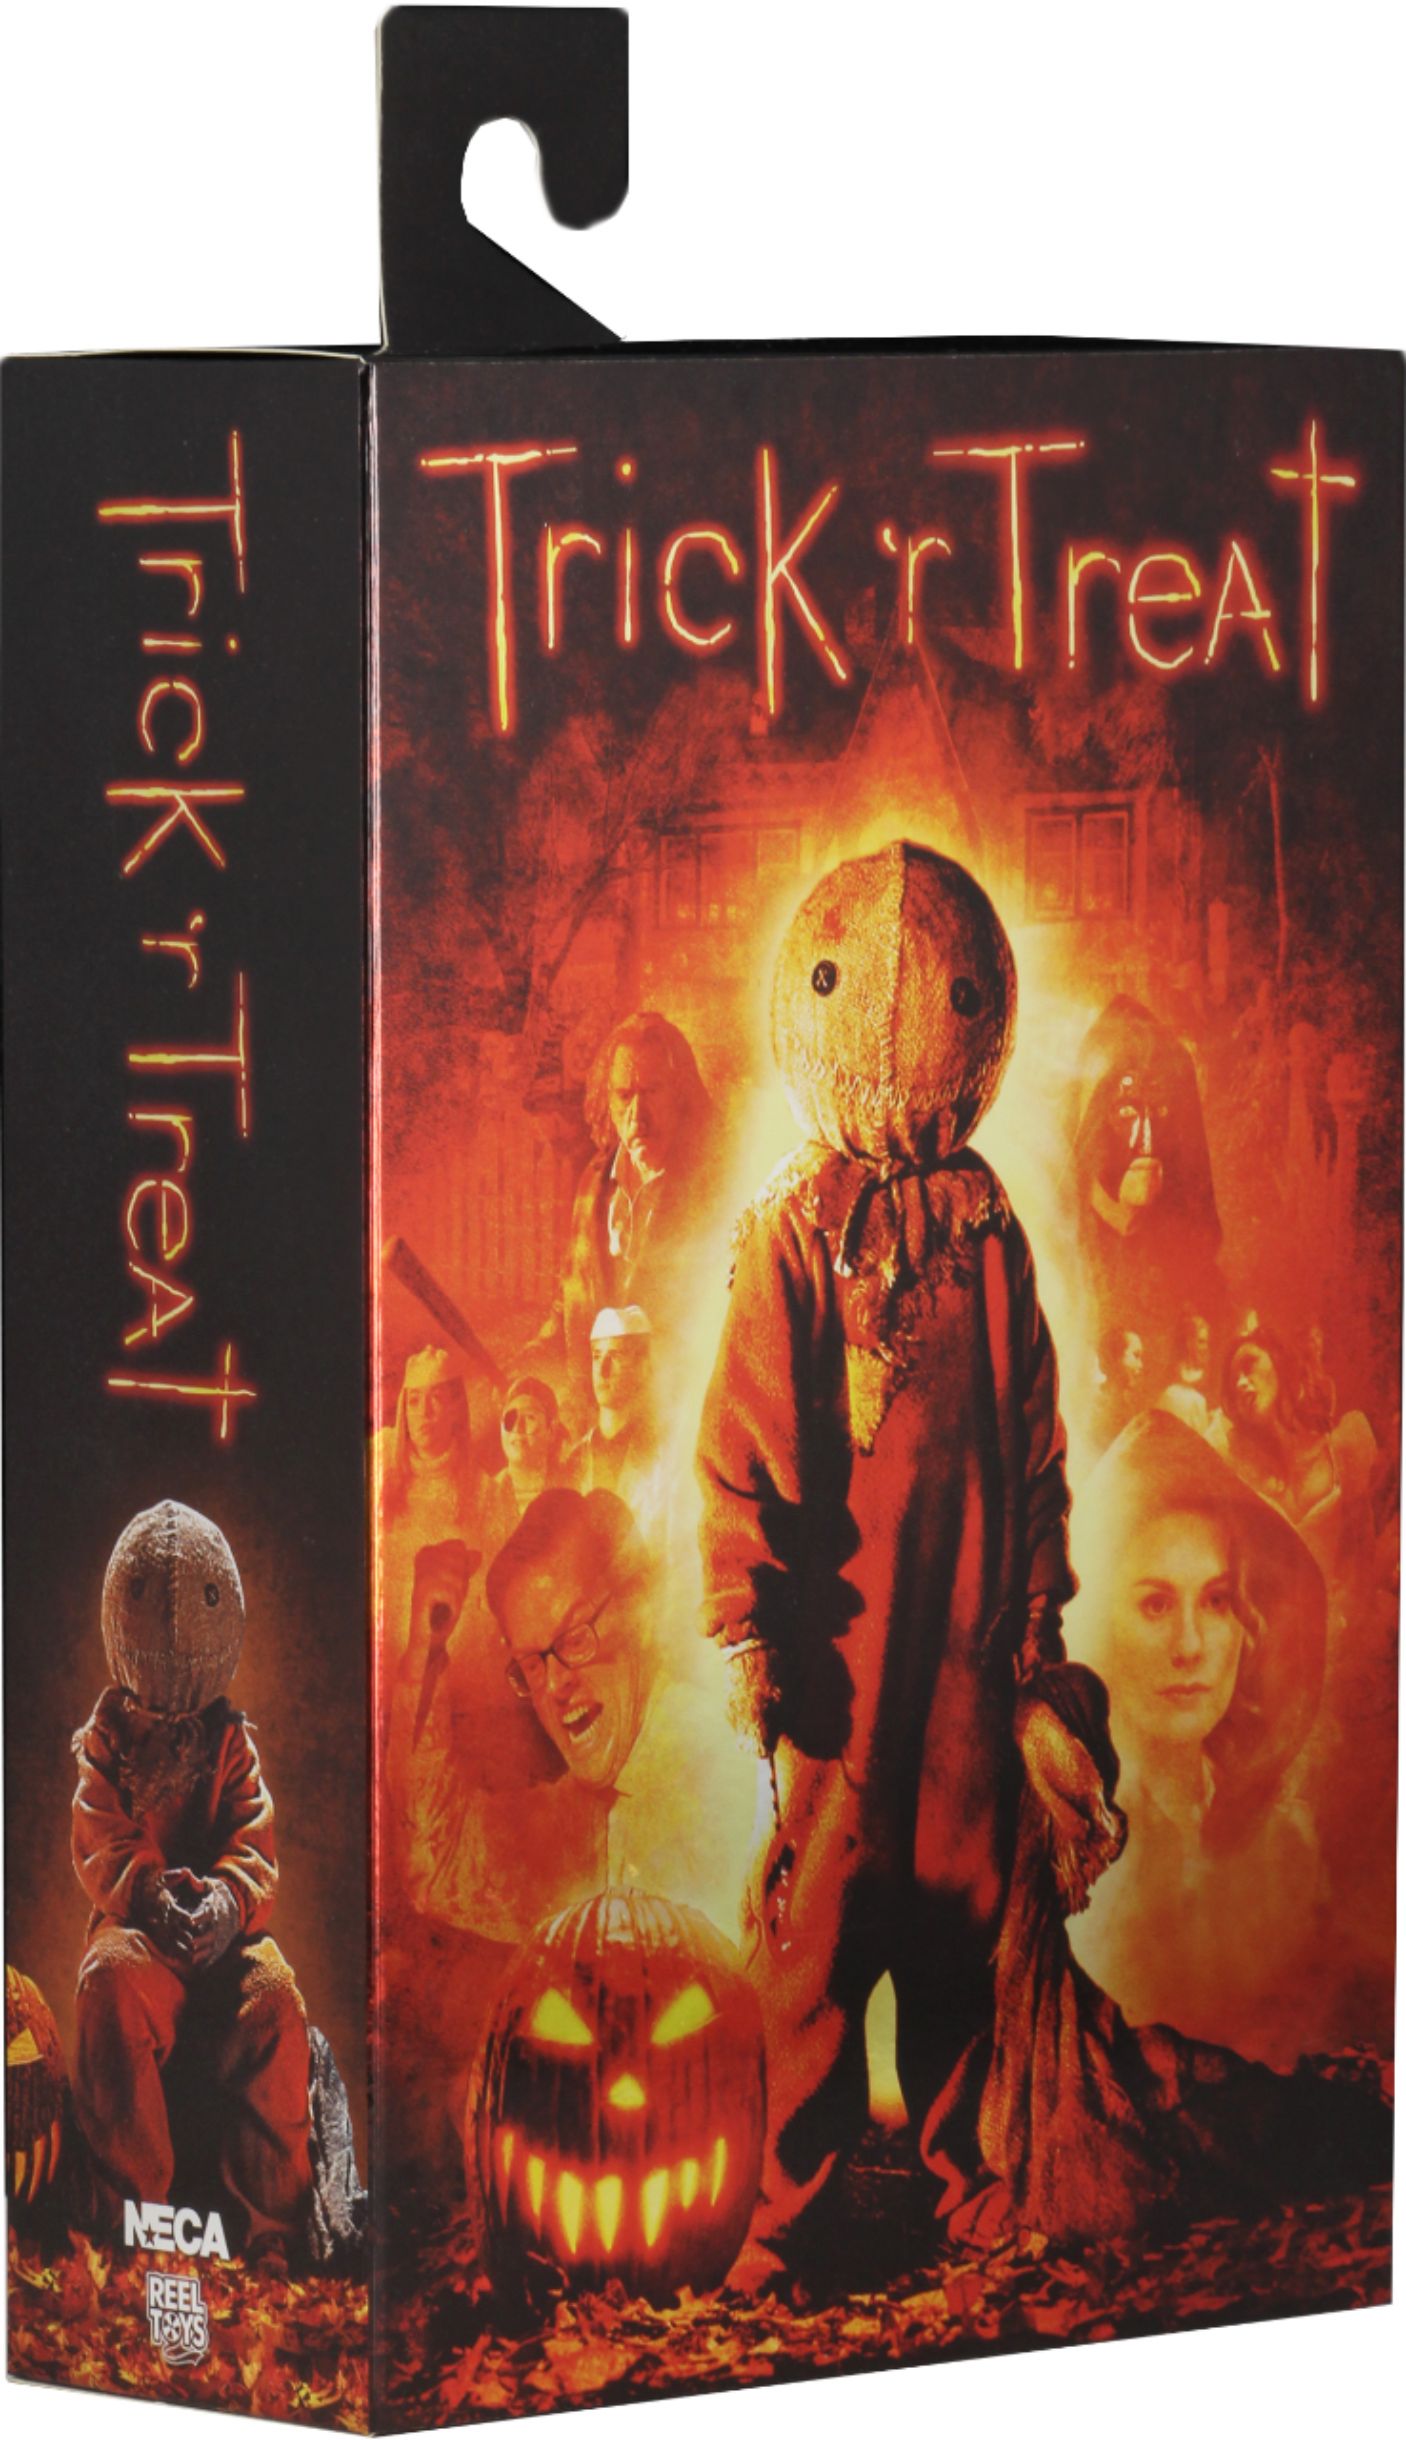 NECA Trick'r Treat Sam Ultimate 7 inch Action Figure for sale online